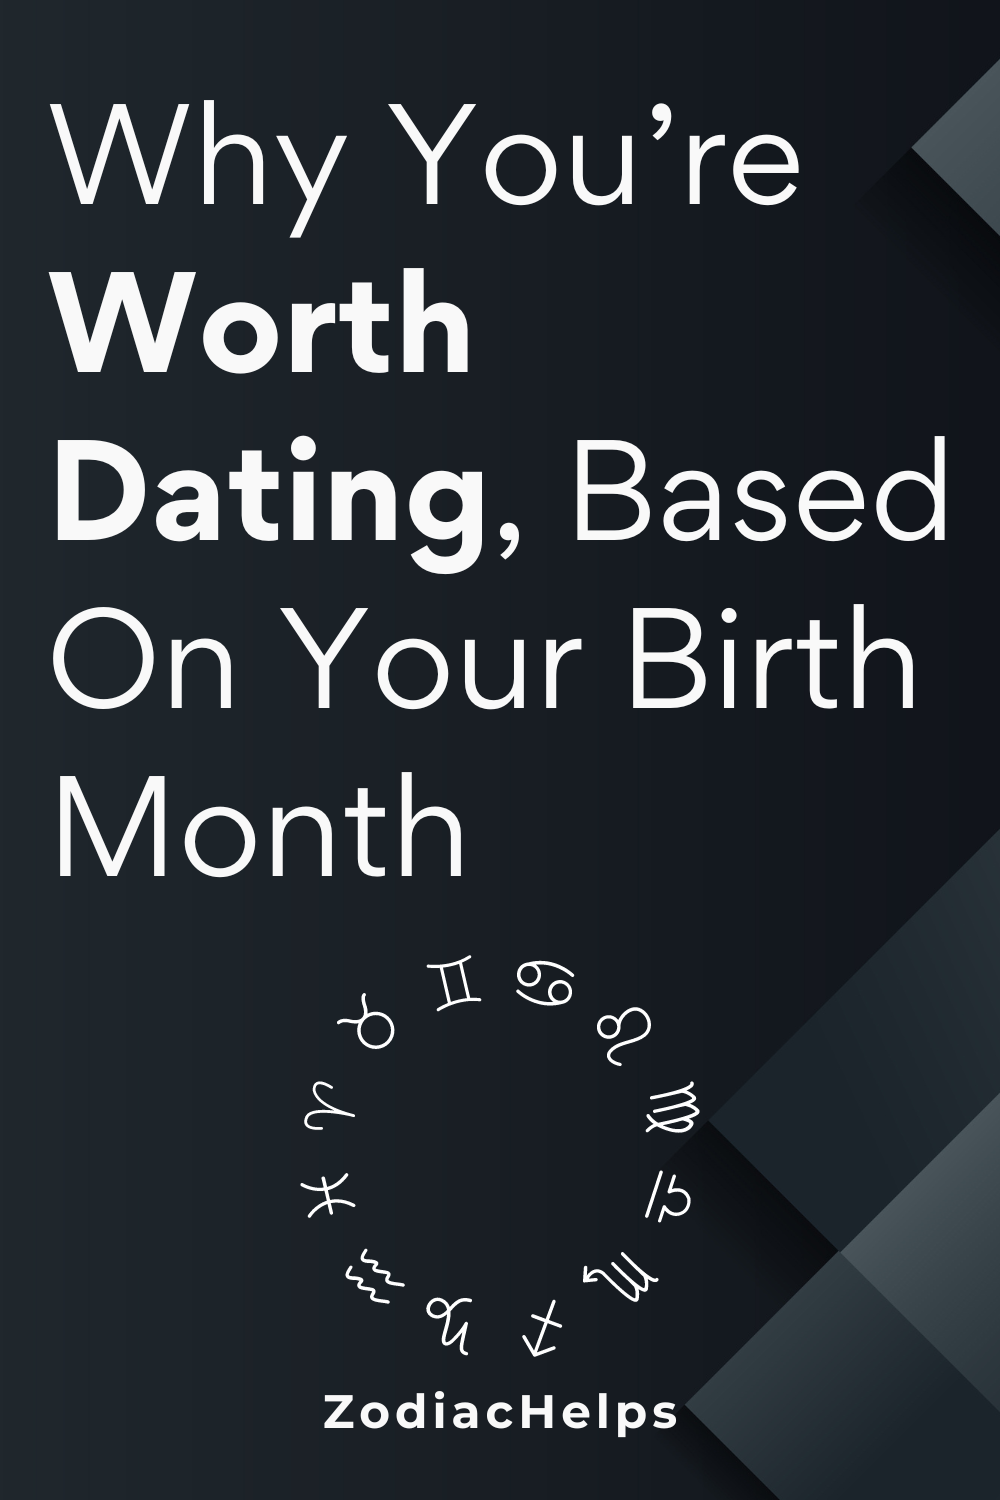 Why You’re Worth Dating, Based On Your Birth Month